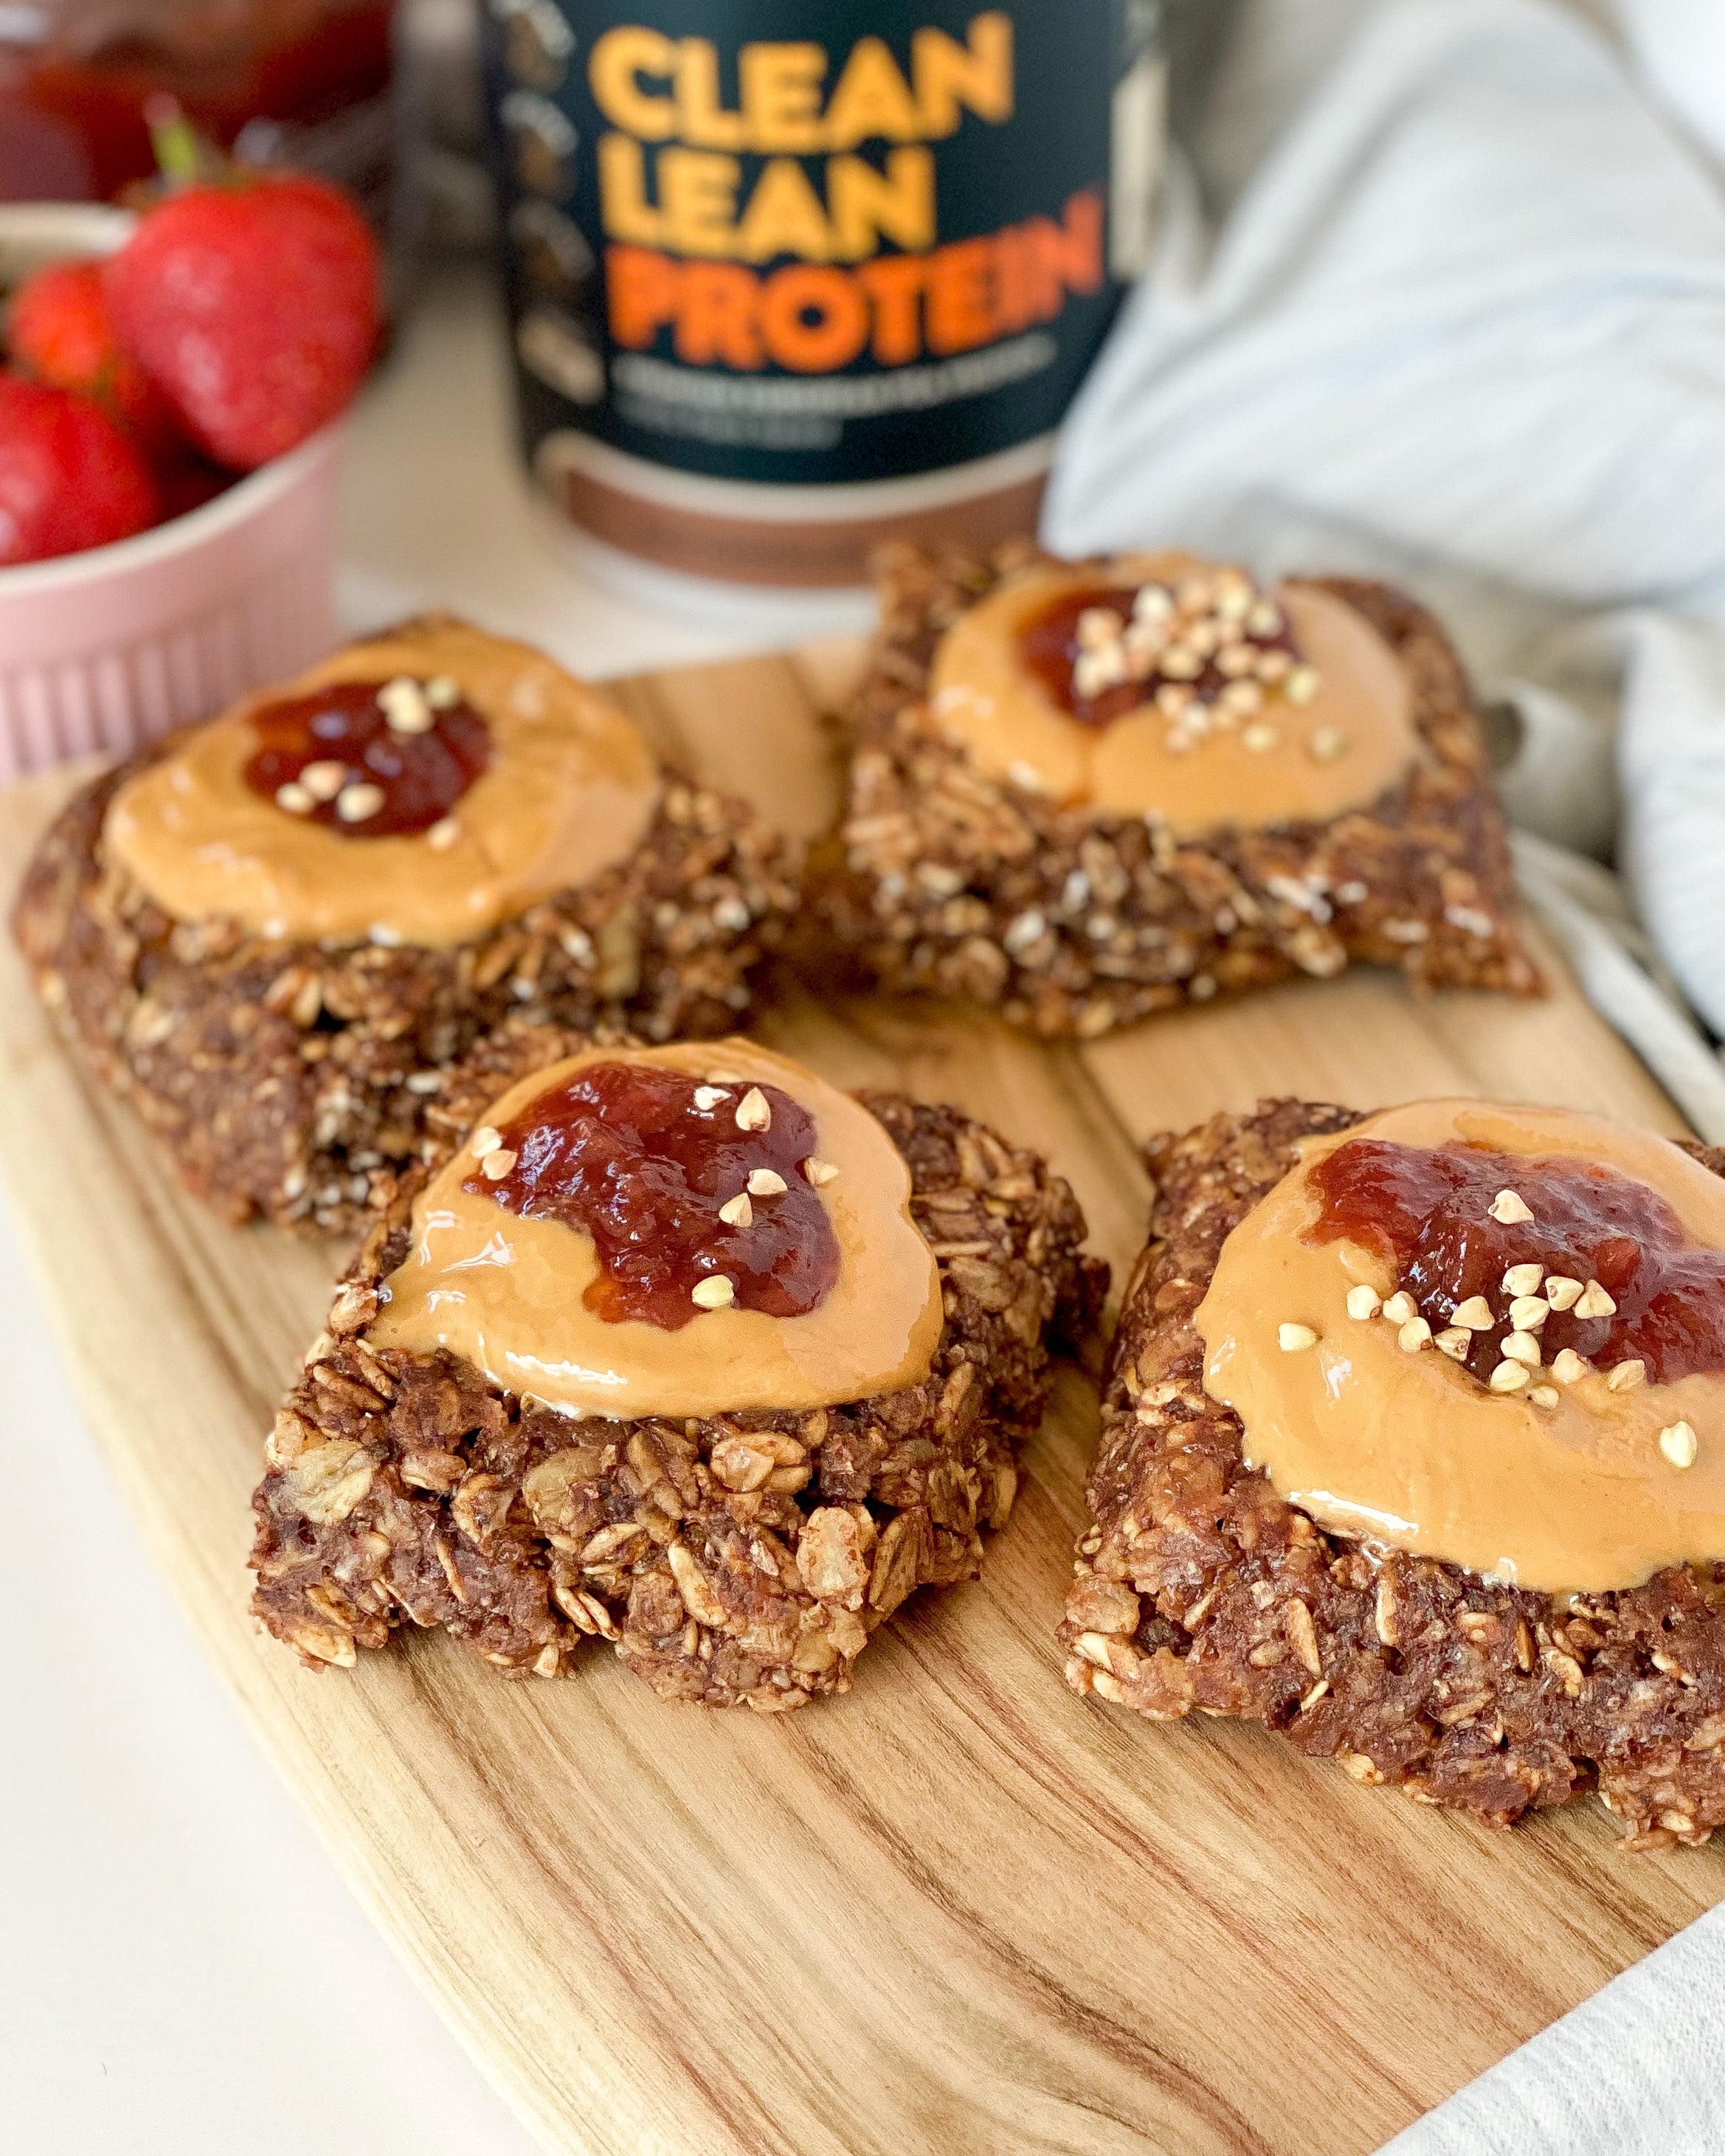 PROTEIN PEANUT BUTTER JELL-O CHOCOLATE SQUARES